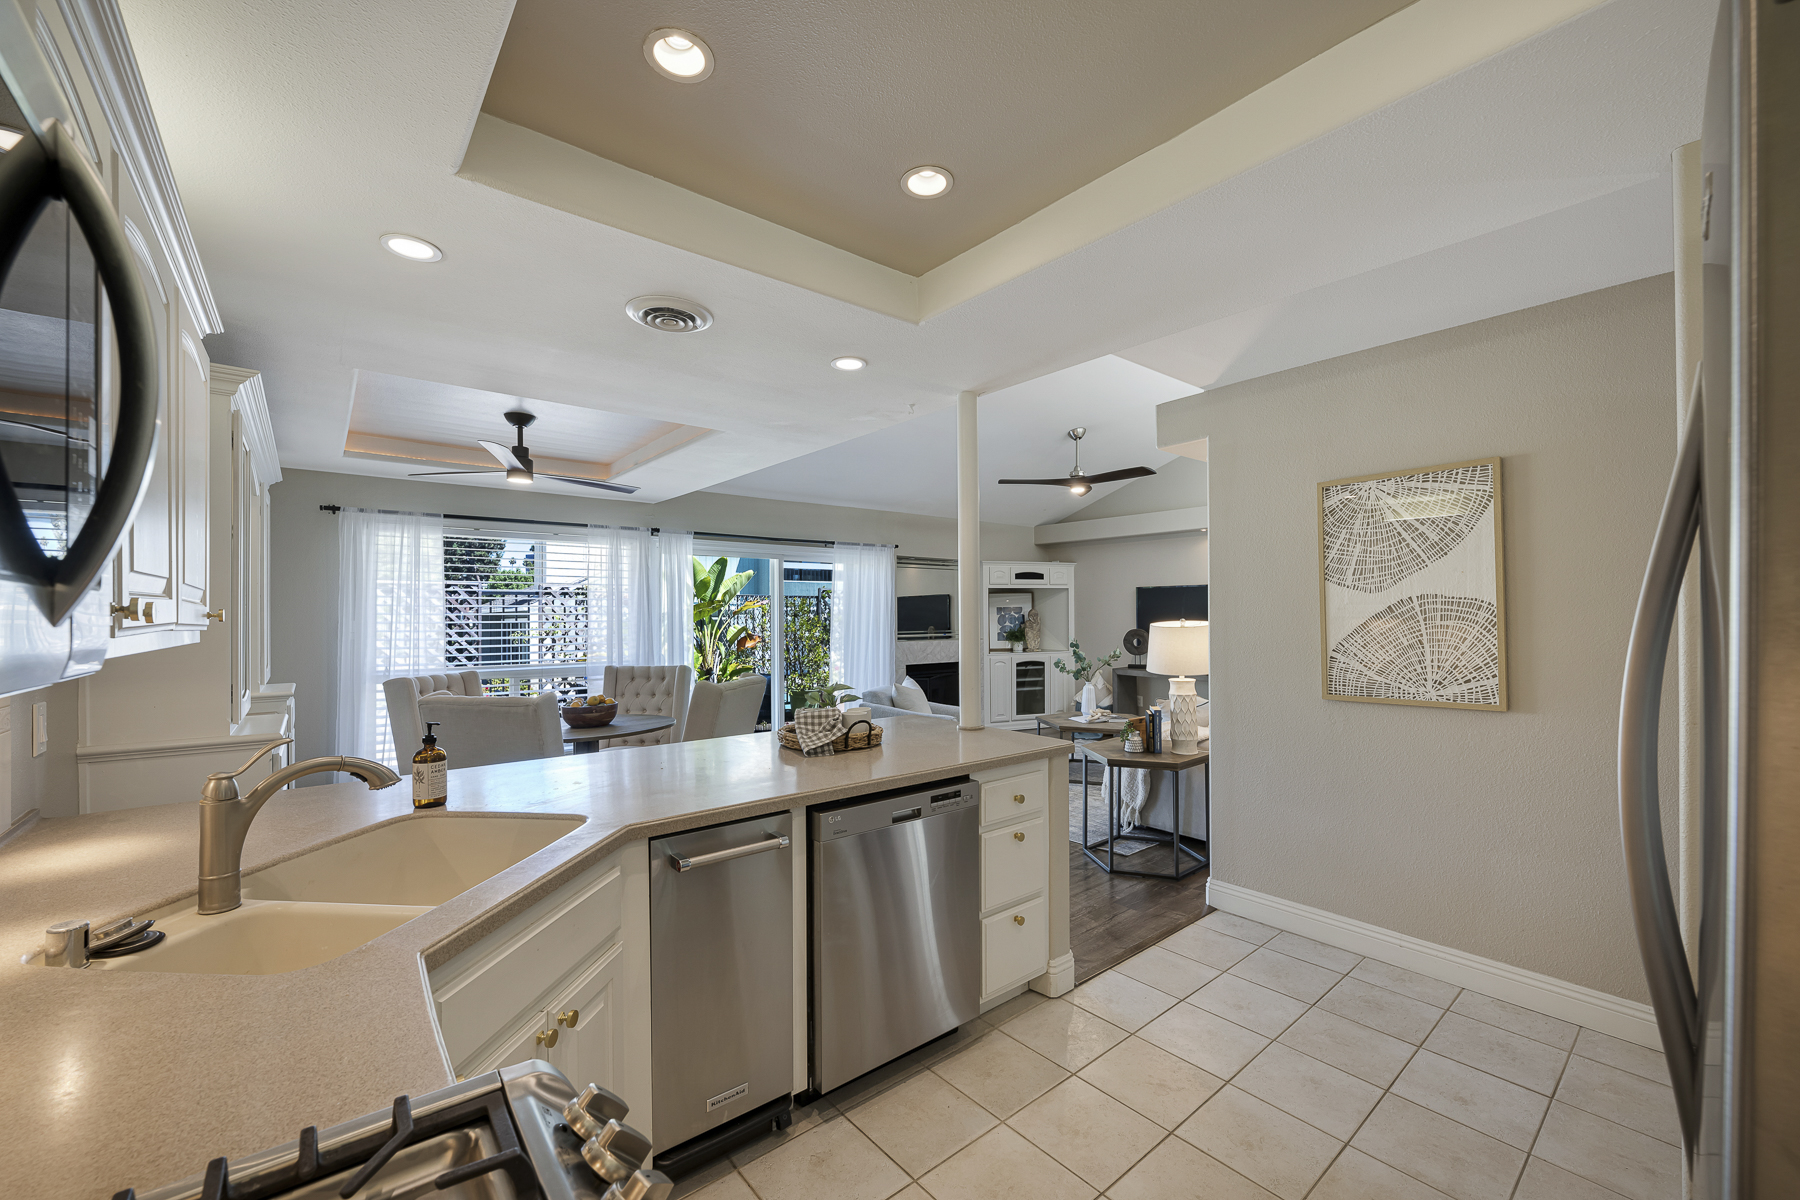 3424 Pinebrook Costa Mesa CA 92626: Kitchen picture of floors, living room, and outdoors.